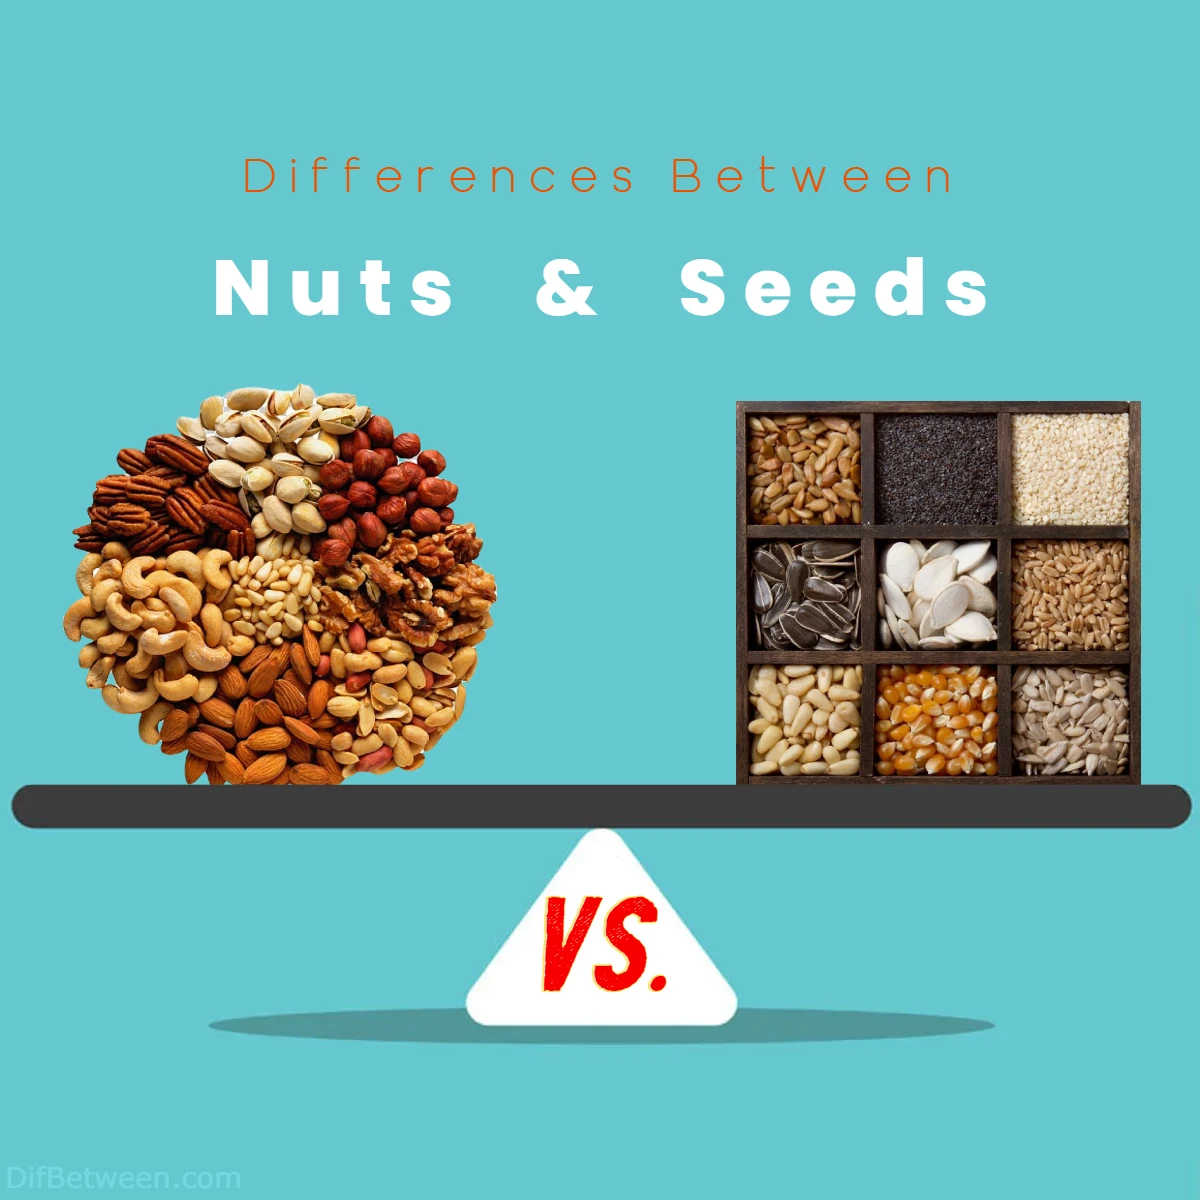 Differences Between Nuts vs Seeds